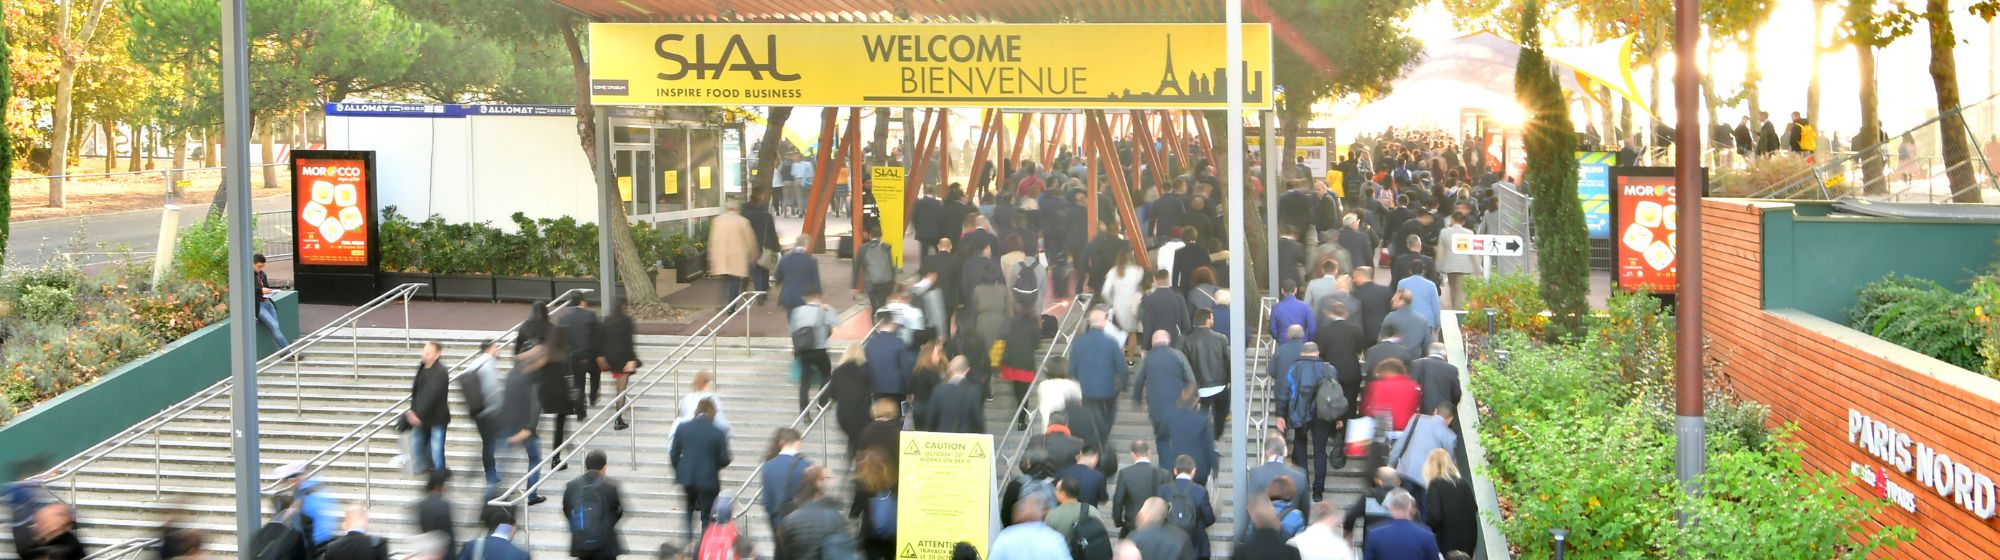 Crowded entrance to SIAL Paris